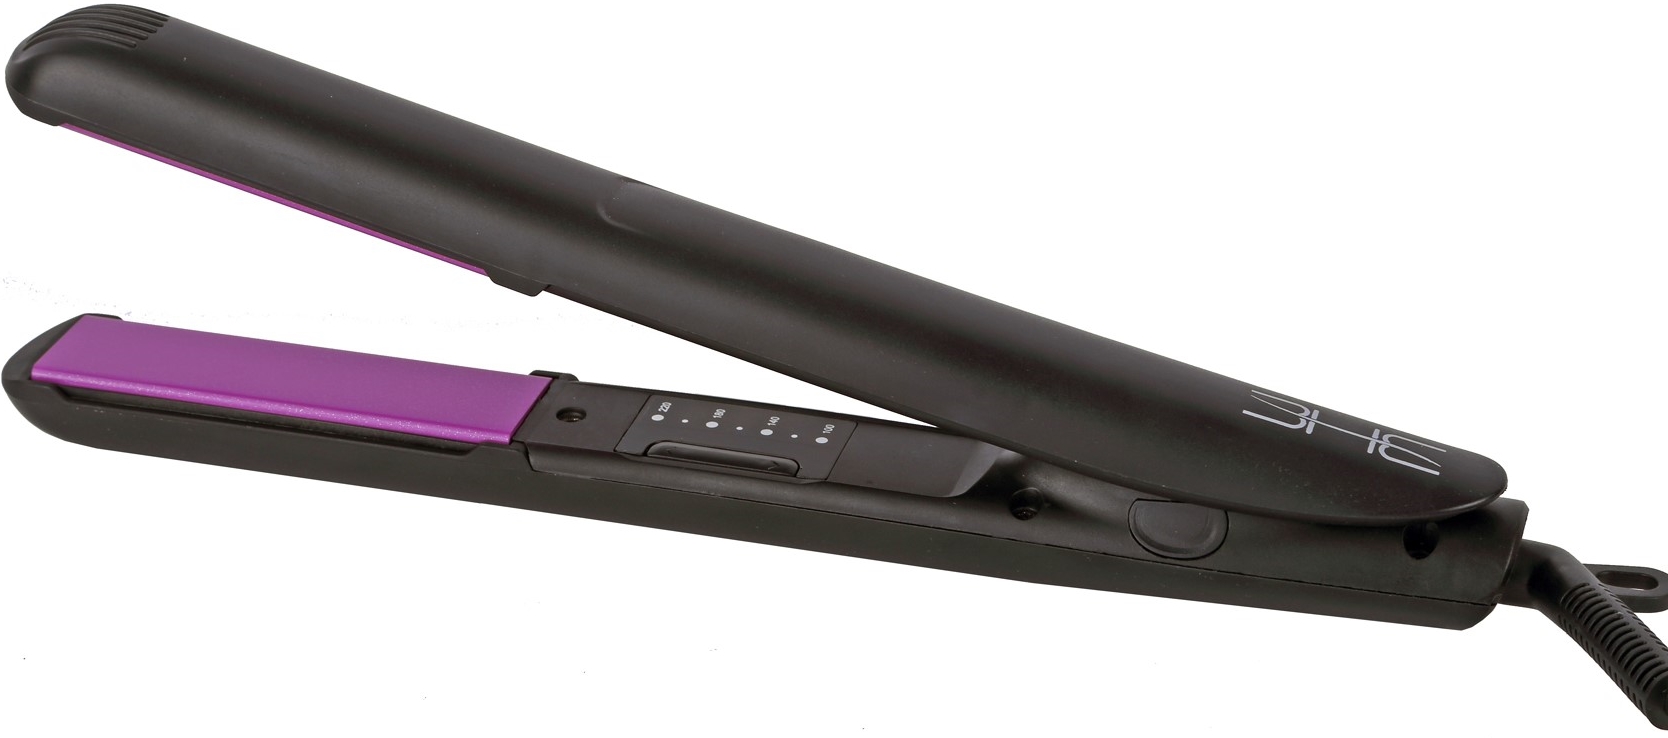 BHE HAIR IRON STRAIGHTENERS BHE HAIR IRON AGENT IN KZN SALON CLEO 0315002353 THE FOR BEST DEAL FOR CHEAPEST DEAL IN BHE BEAUTIFUL HAIR EVERYDAY  0315002353